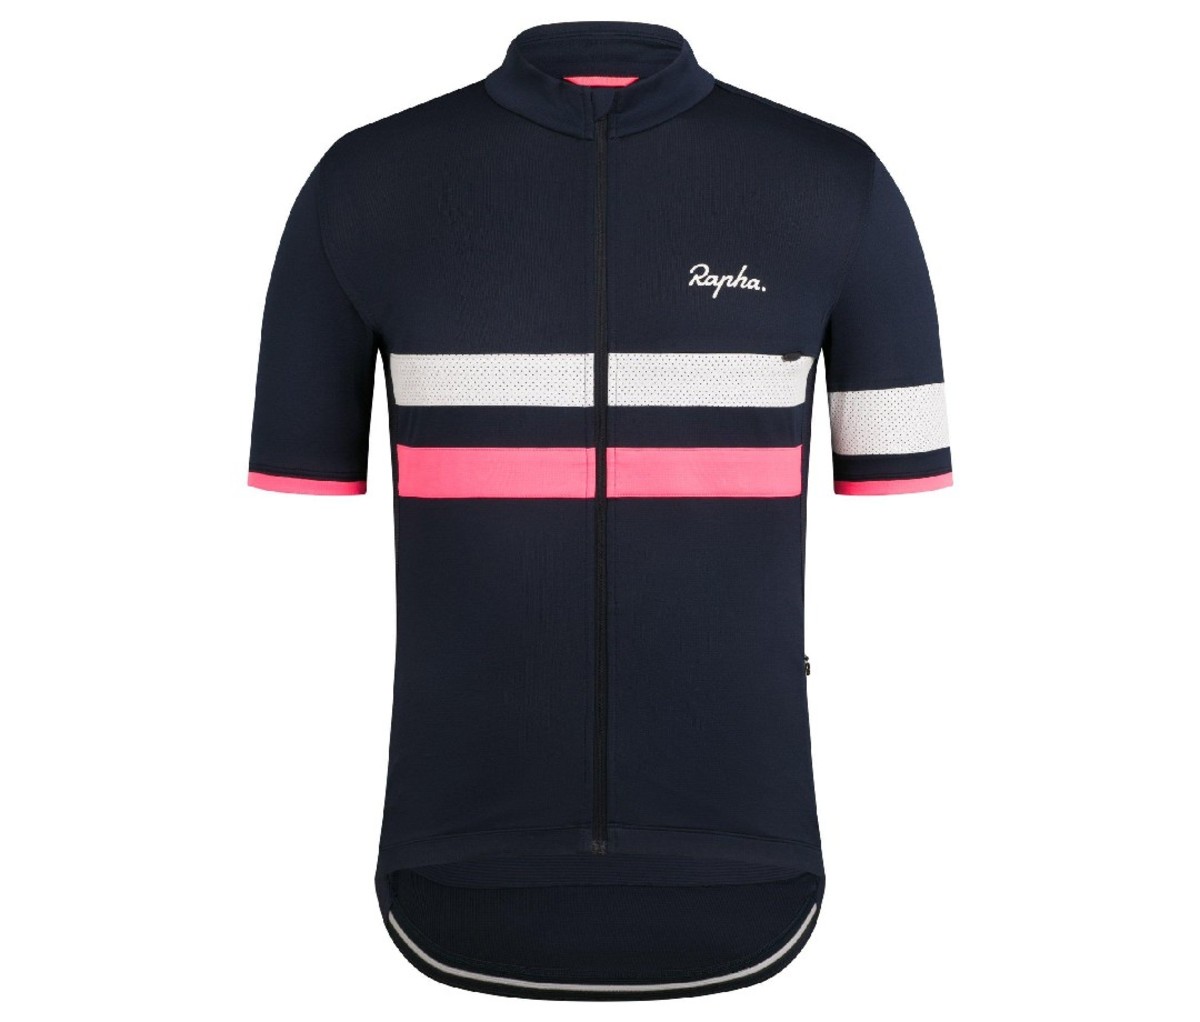 An image of a navy blue Rapha Brevet lightweight jersey with white and pink stripes.